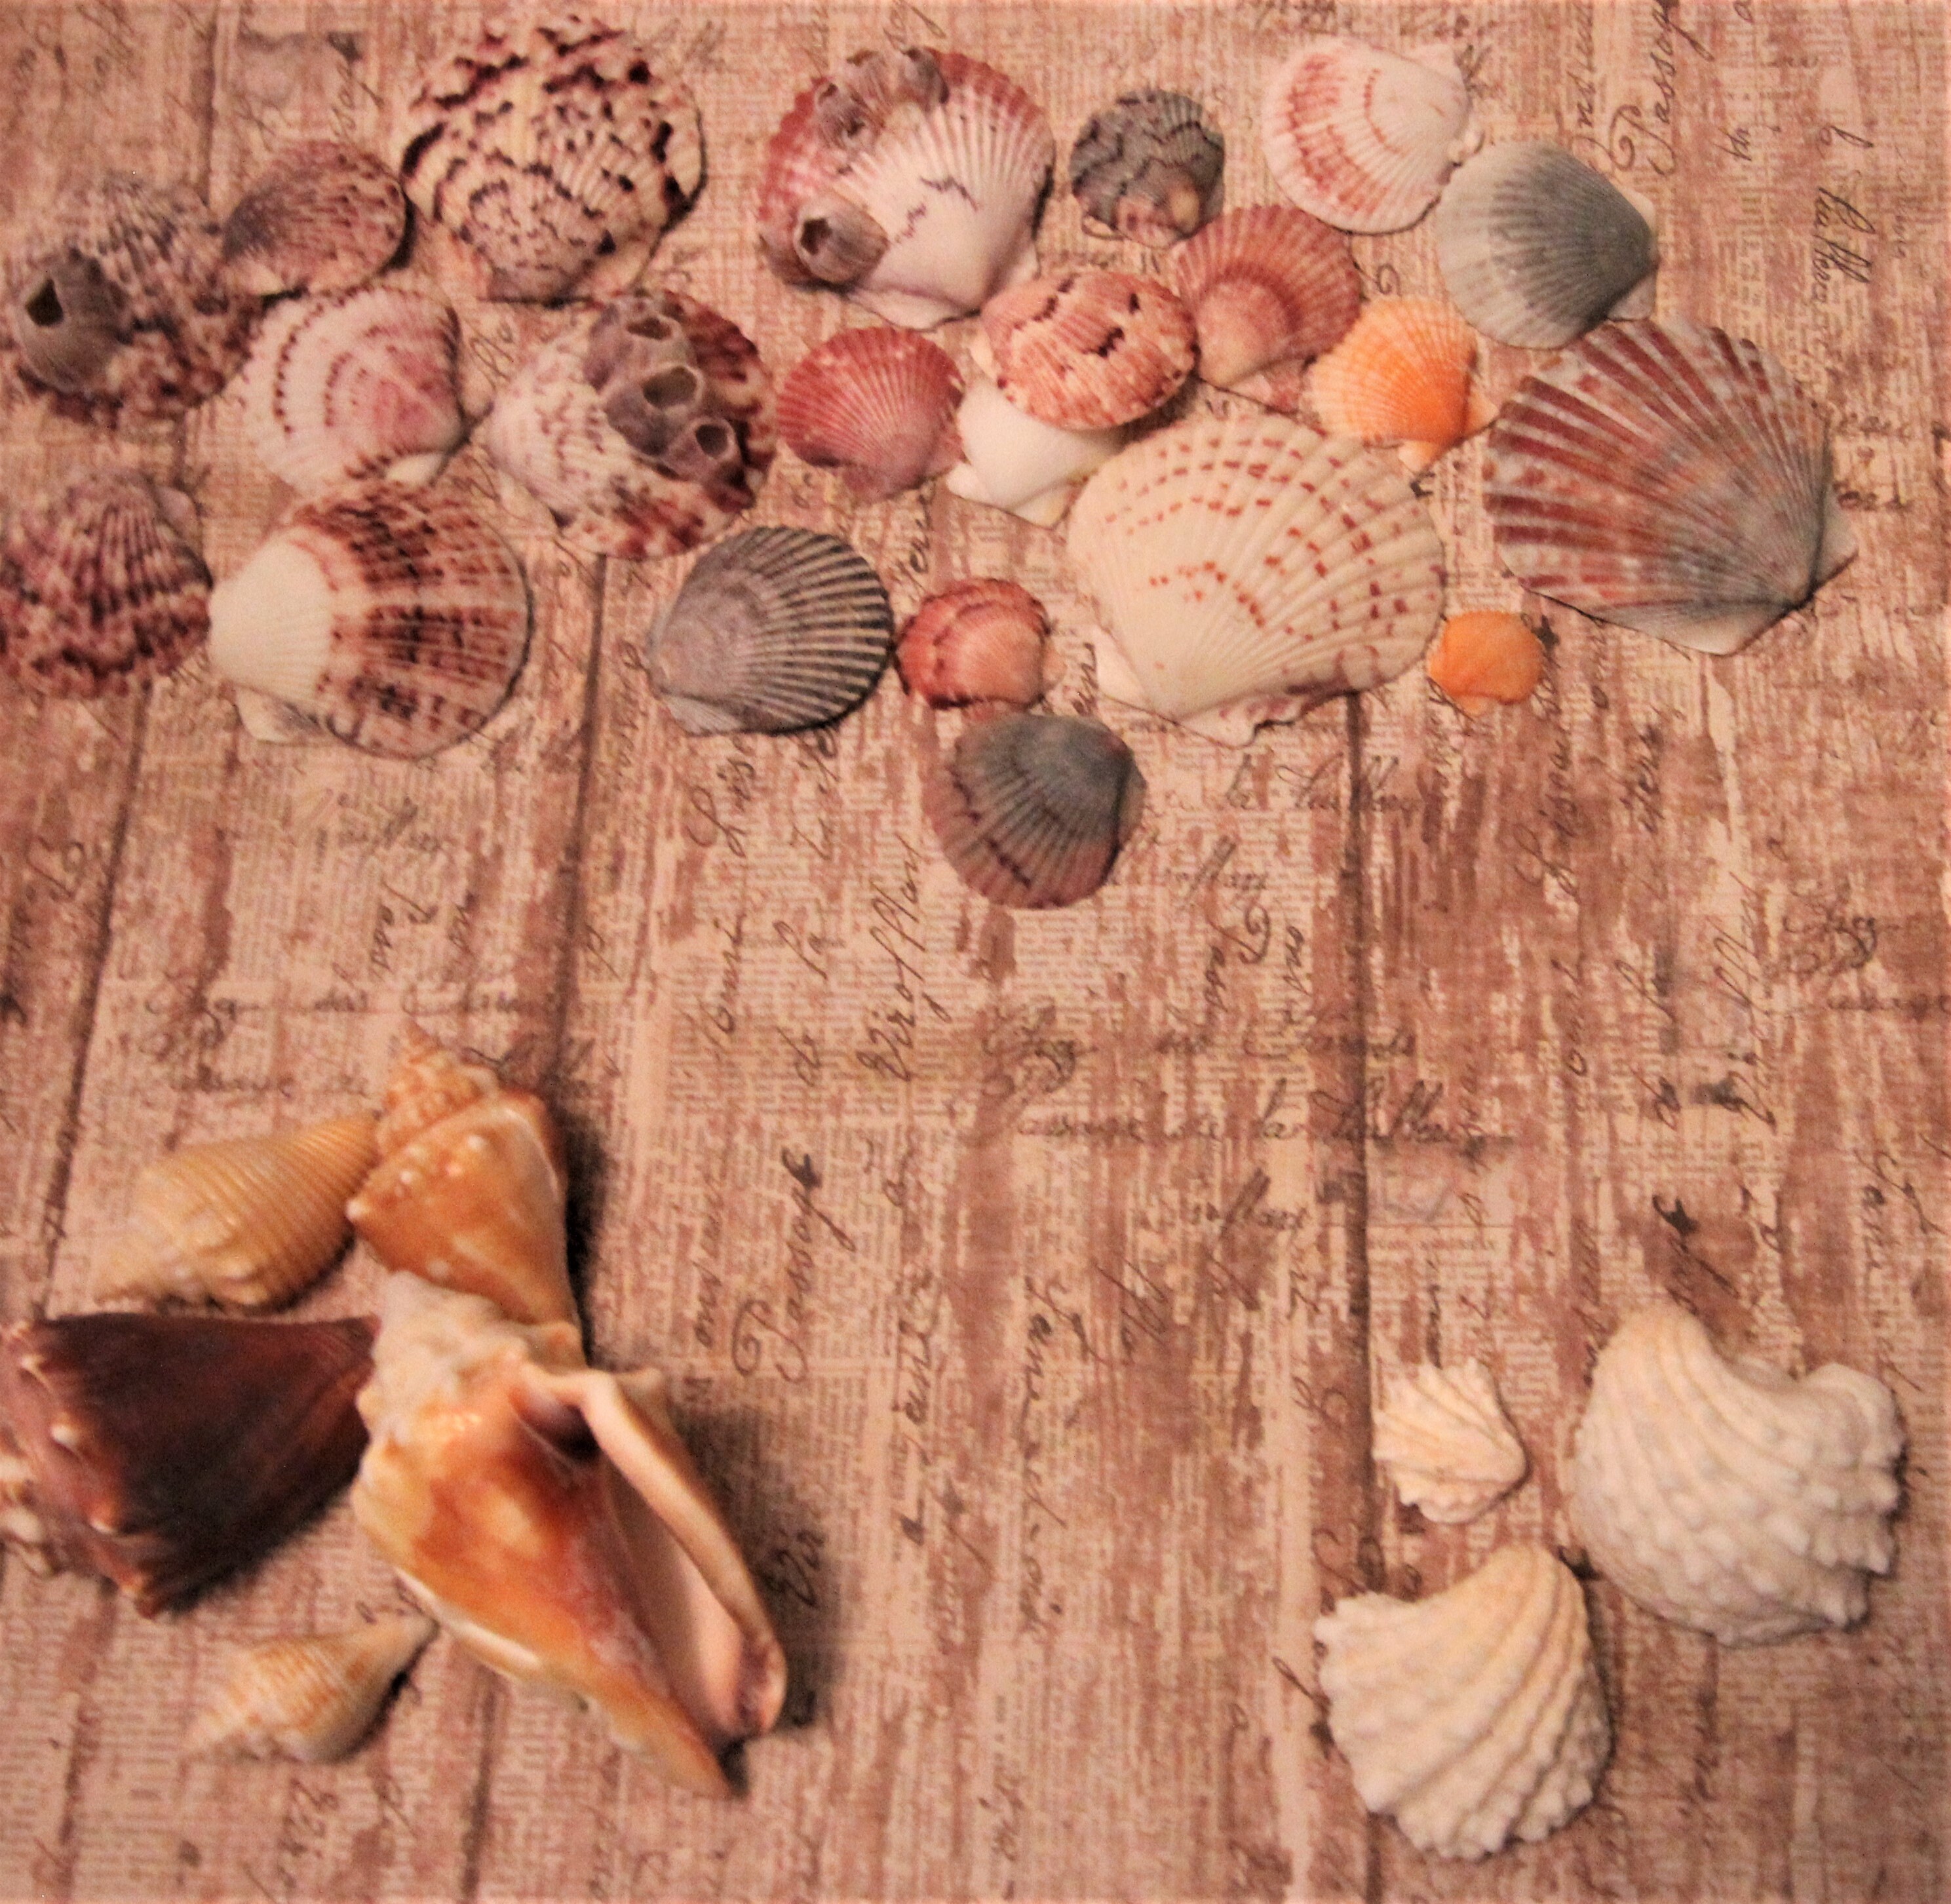 Miniature Conch Shells Little Small Teeny Tiny Light Patterned 